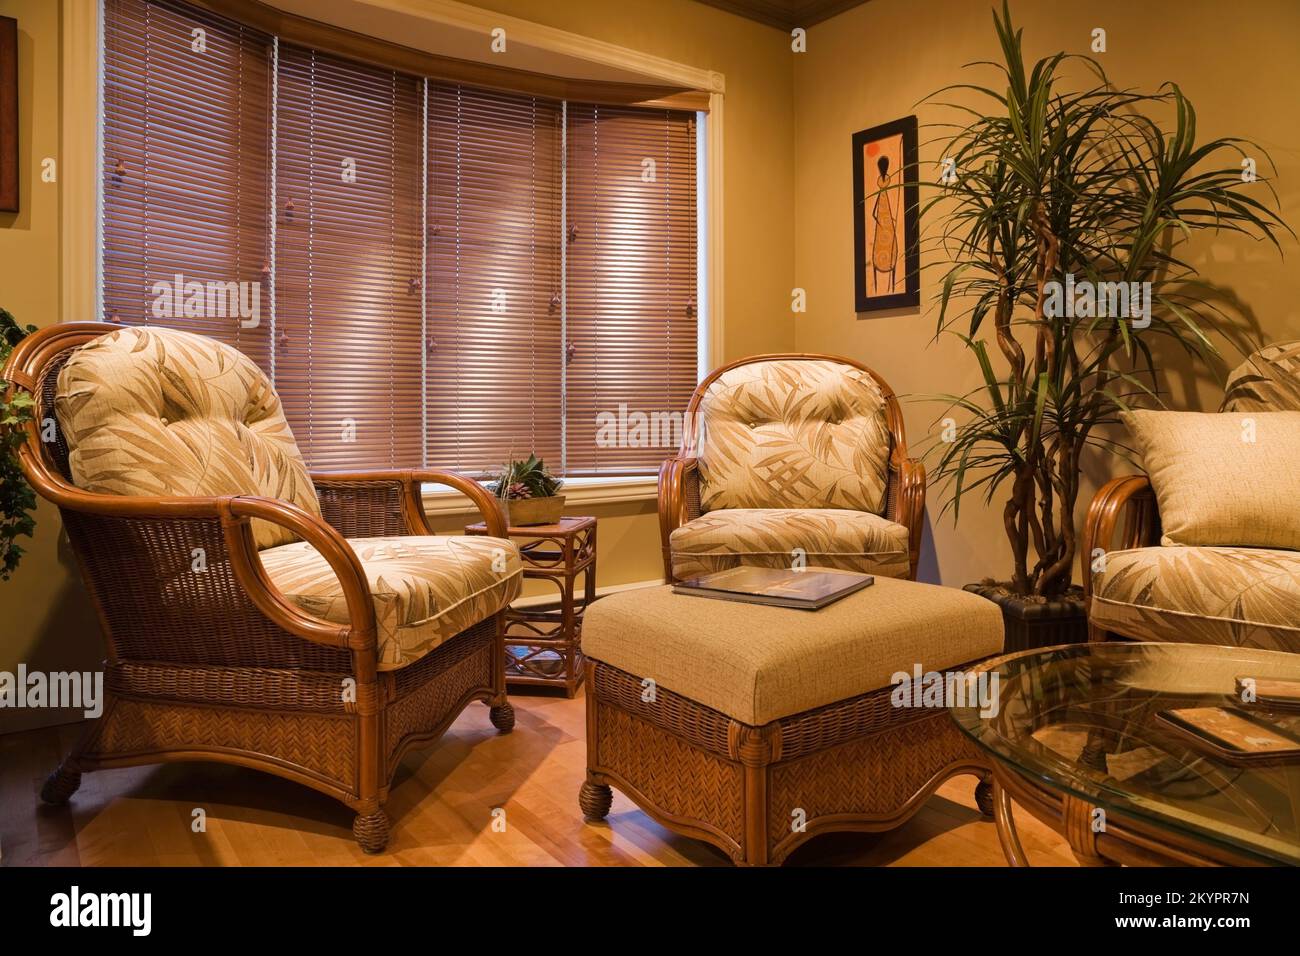 Wicker armchairs and glass top coffee table in living room inside small bungalow style home. Stock Photo